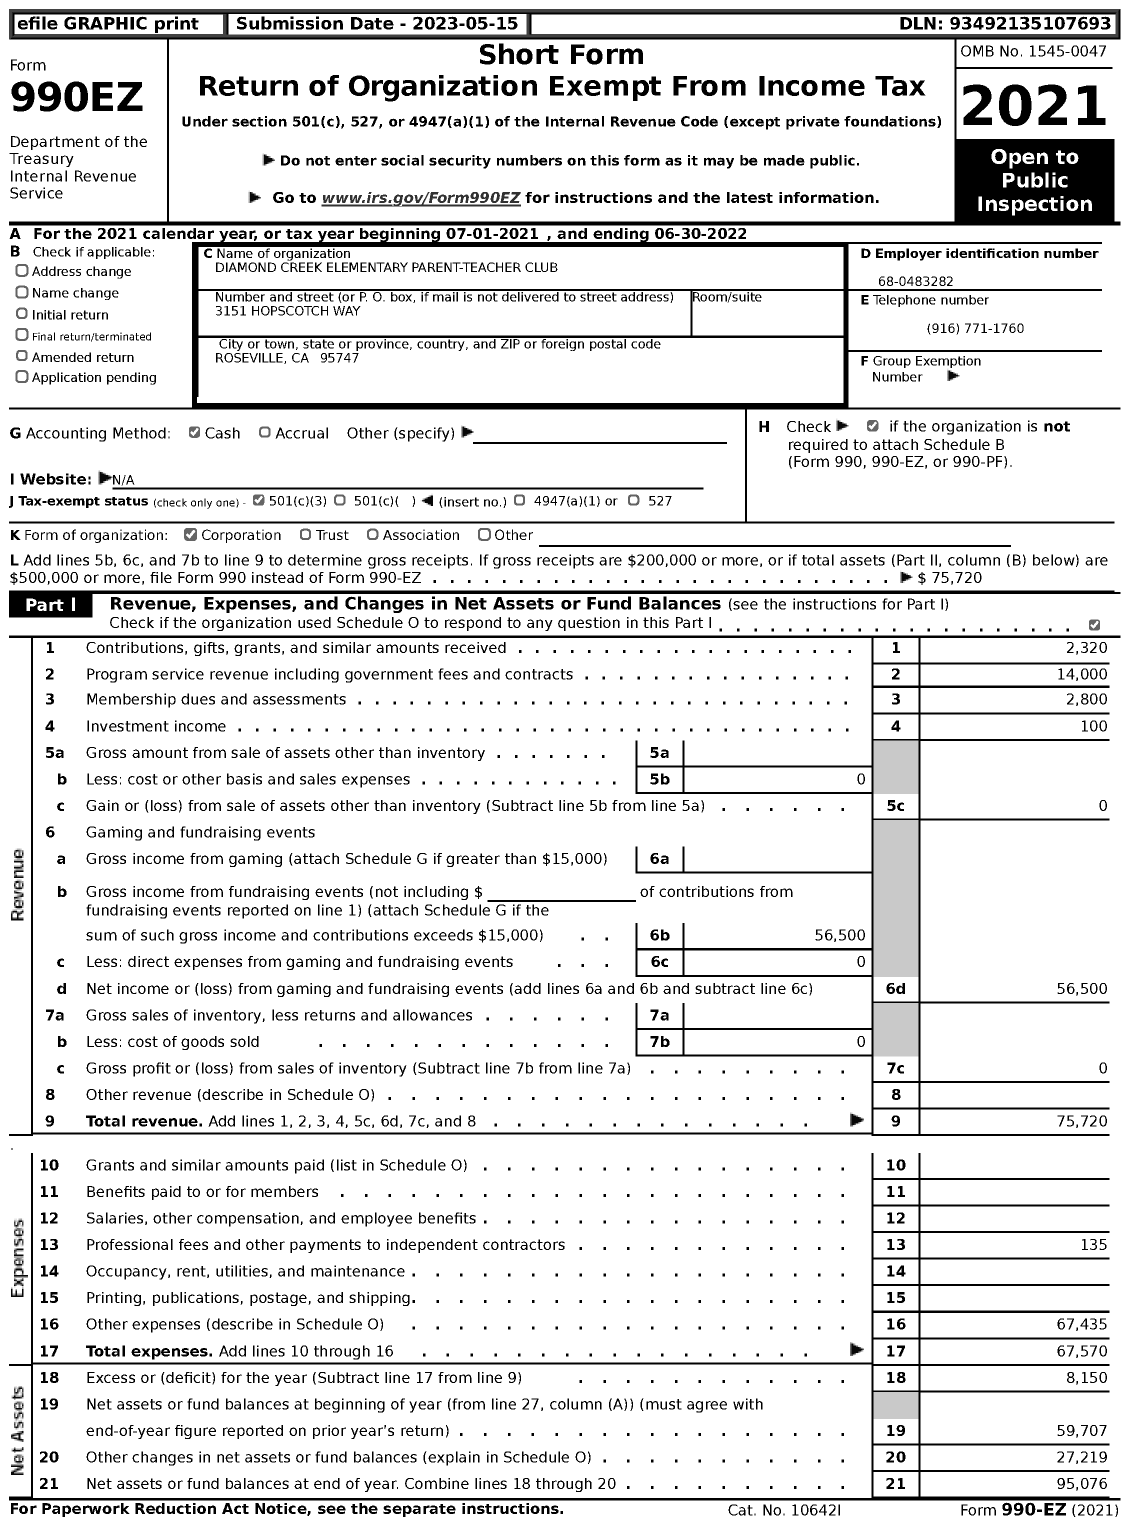 Image of first page of 2021 Form 990EZ for Diamond Creek Elementary Parent-Teacher Club